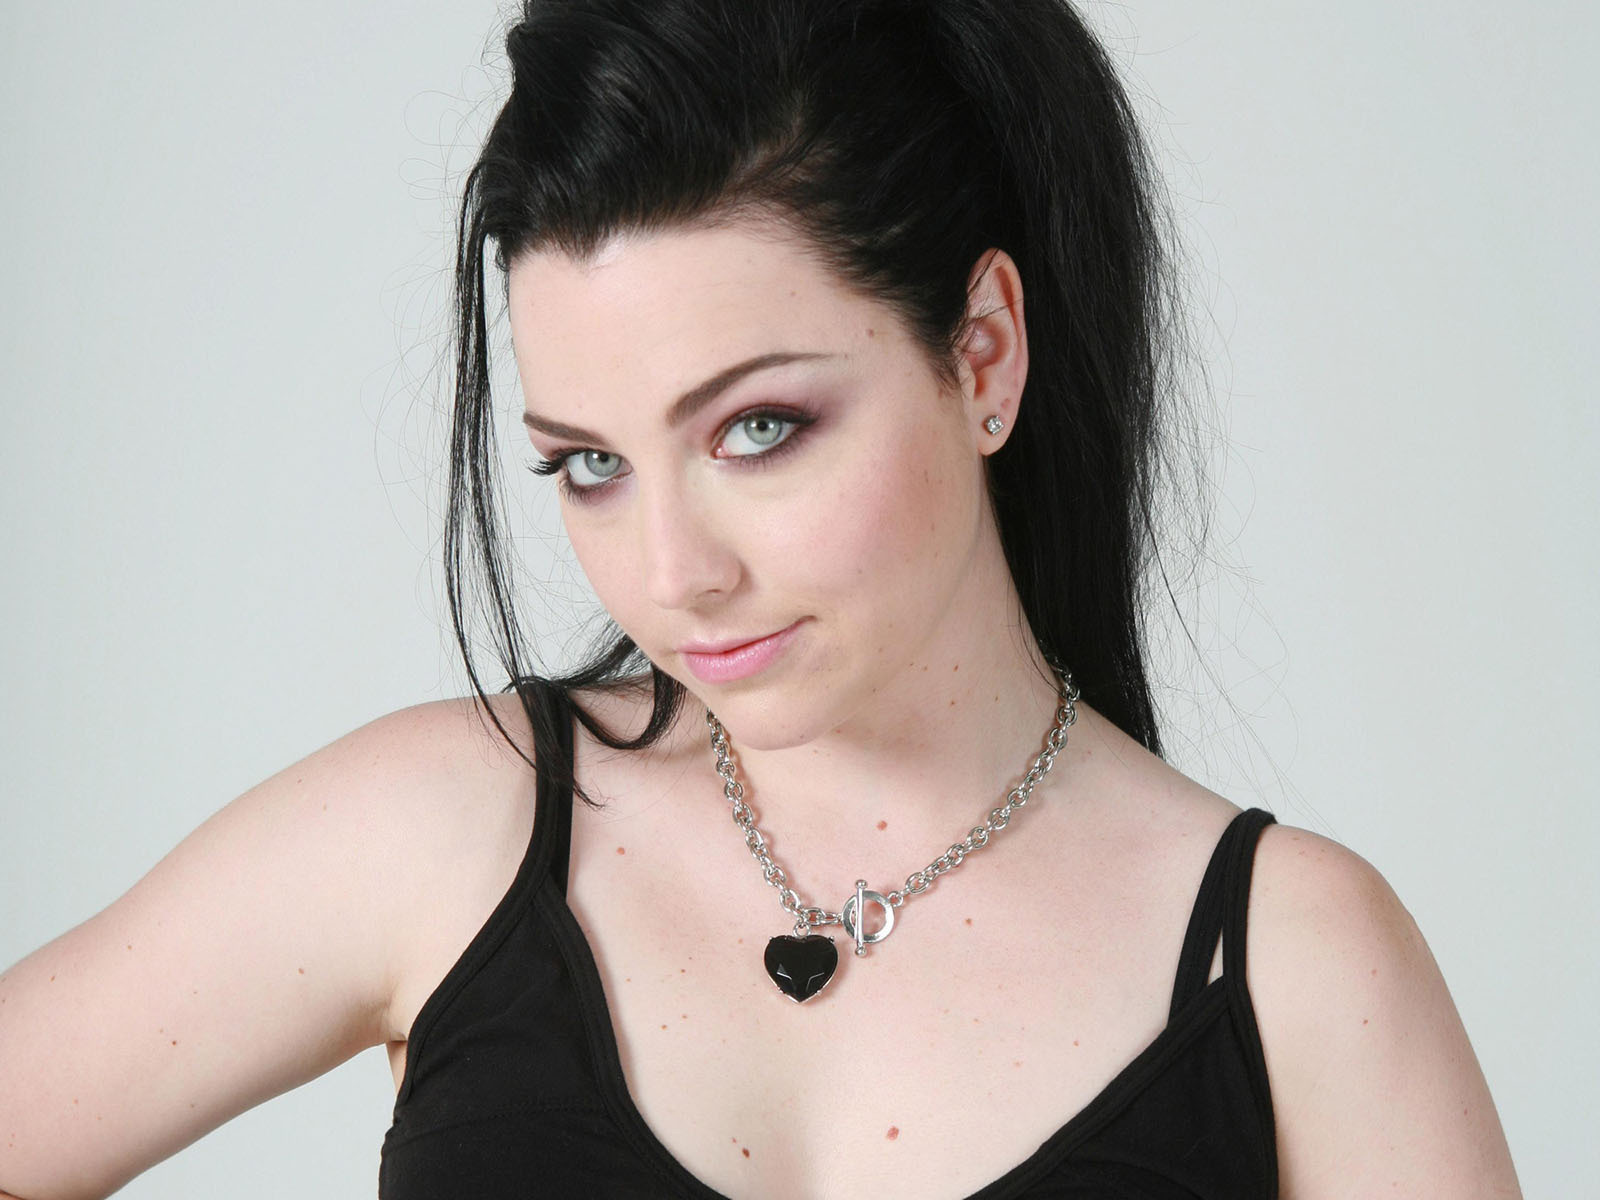 WORLD HOT AND SEXY CELEBRITIES: Amy Lee hot and sexy photo